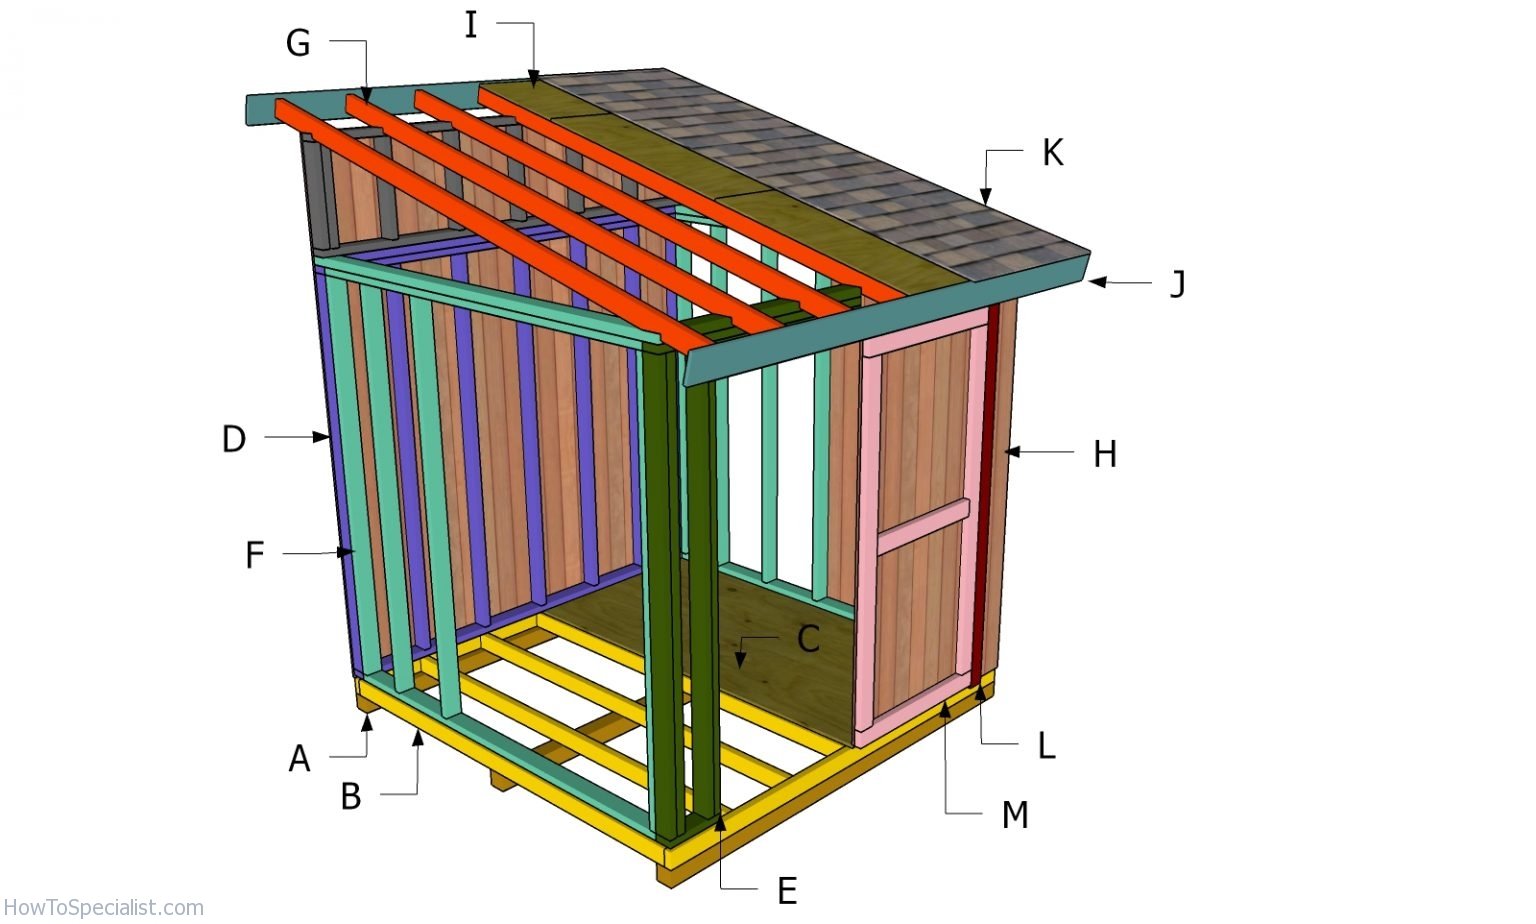 8x8 lean to shed plans free download